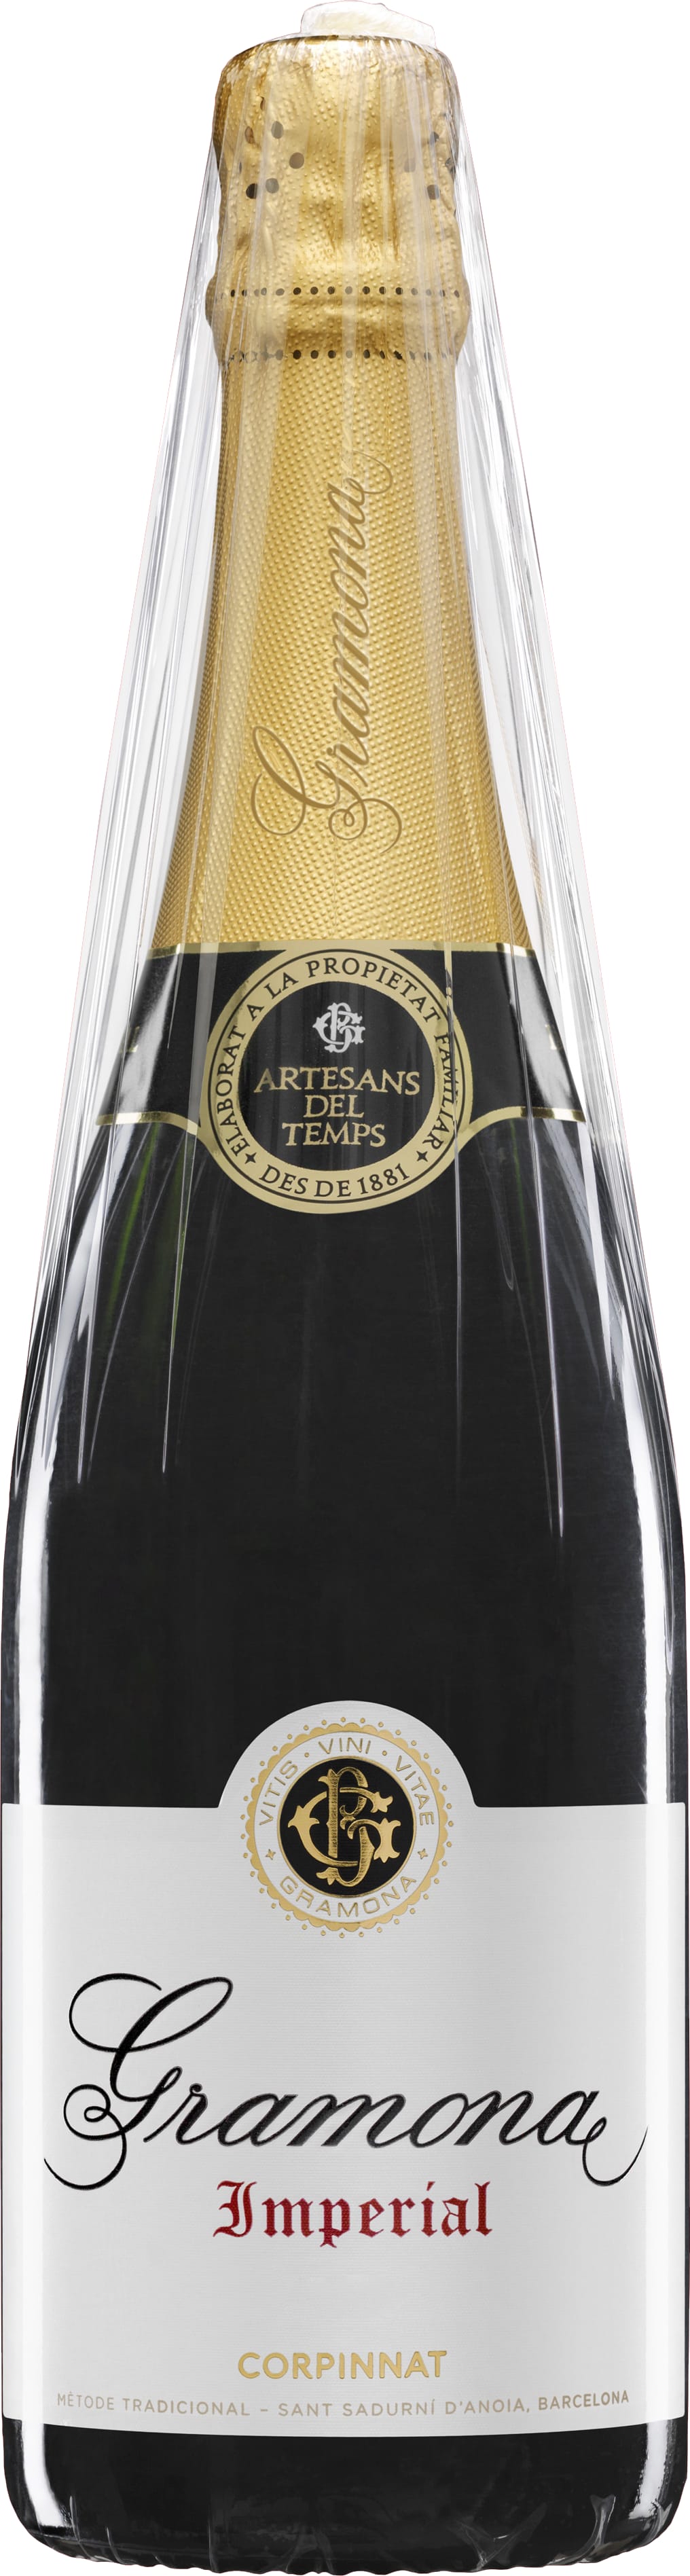 Gramona Imperial Brut Organic 2018 75cl - Buy Gramona Wines from GREAT WINES DIRECT wine shop